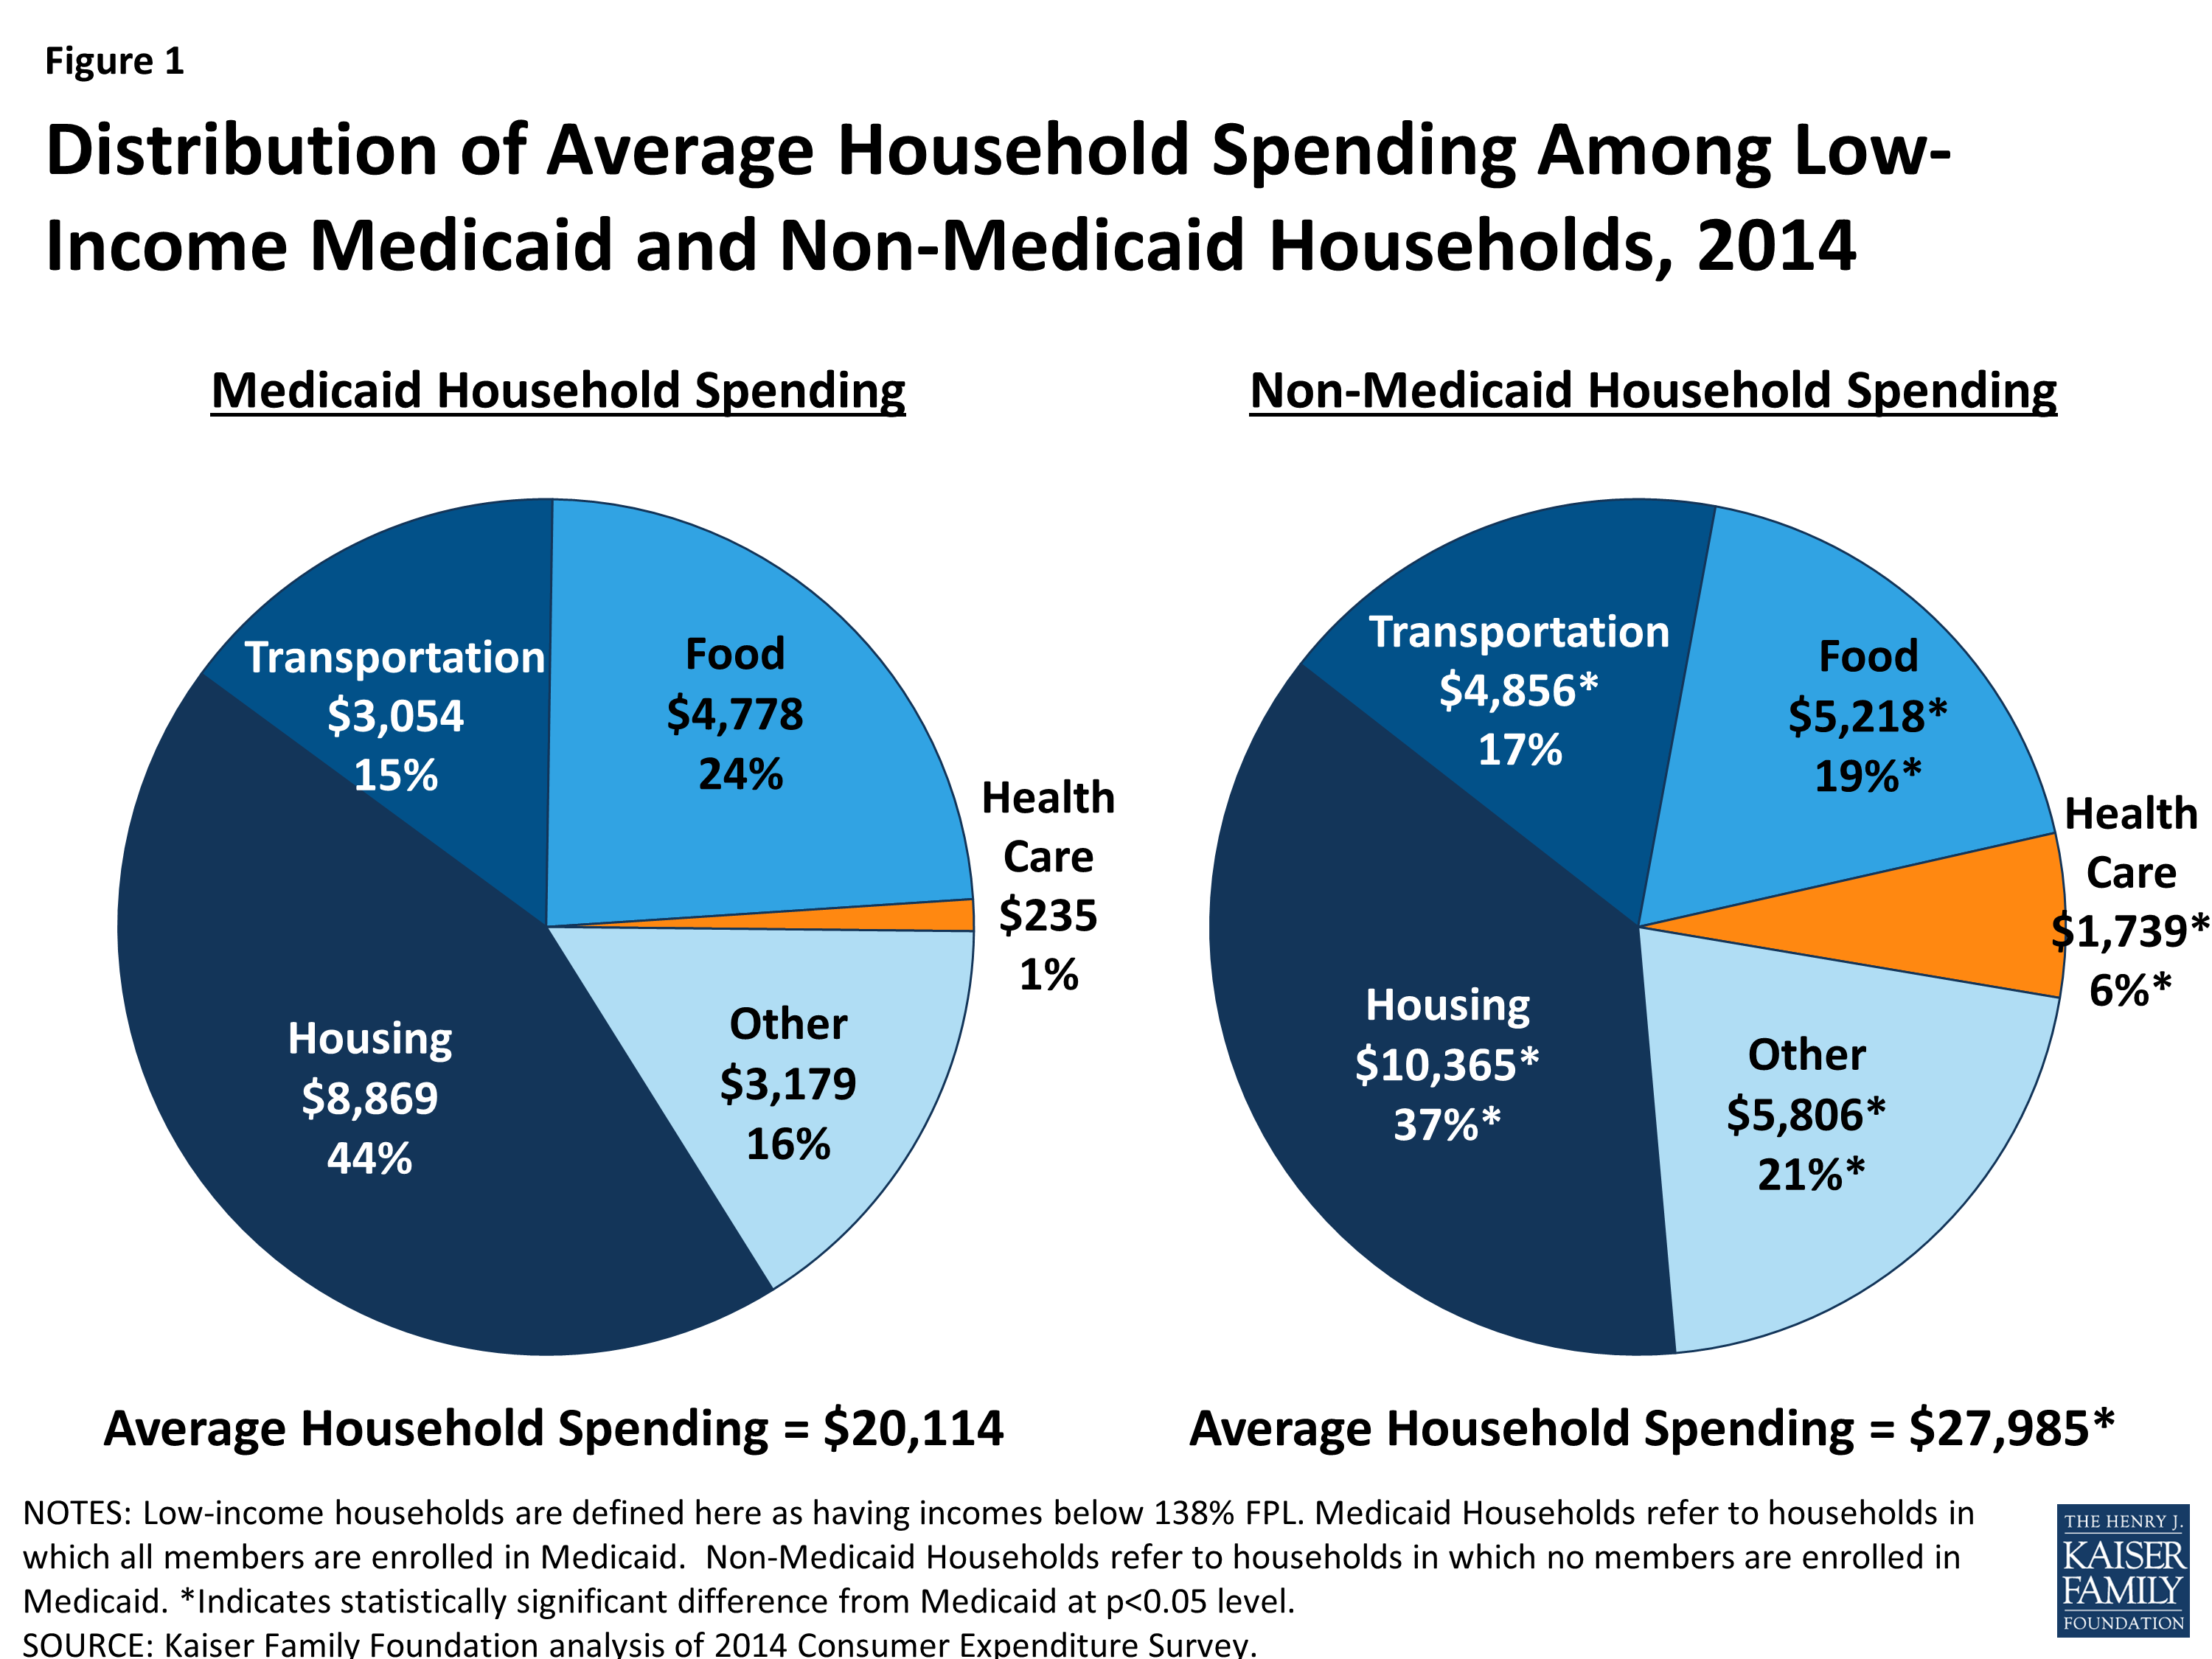 Health Care Spending Among Households with and without